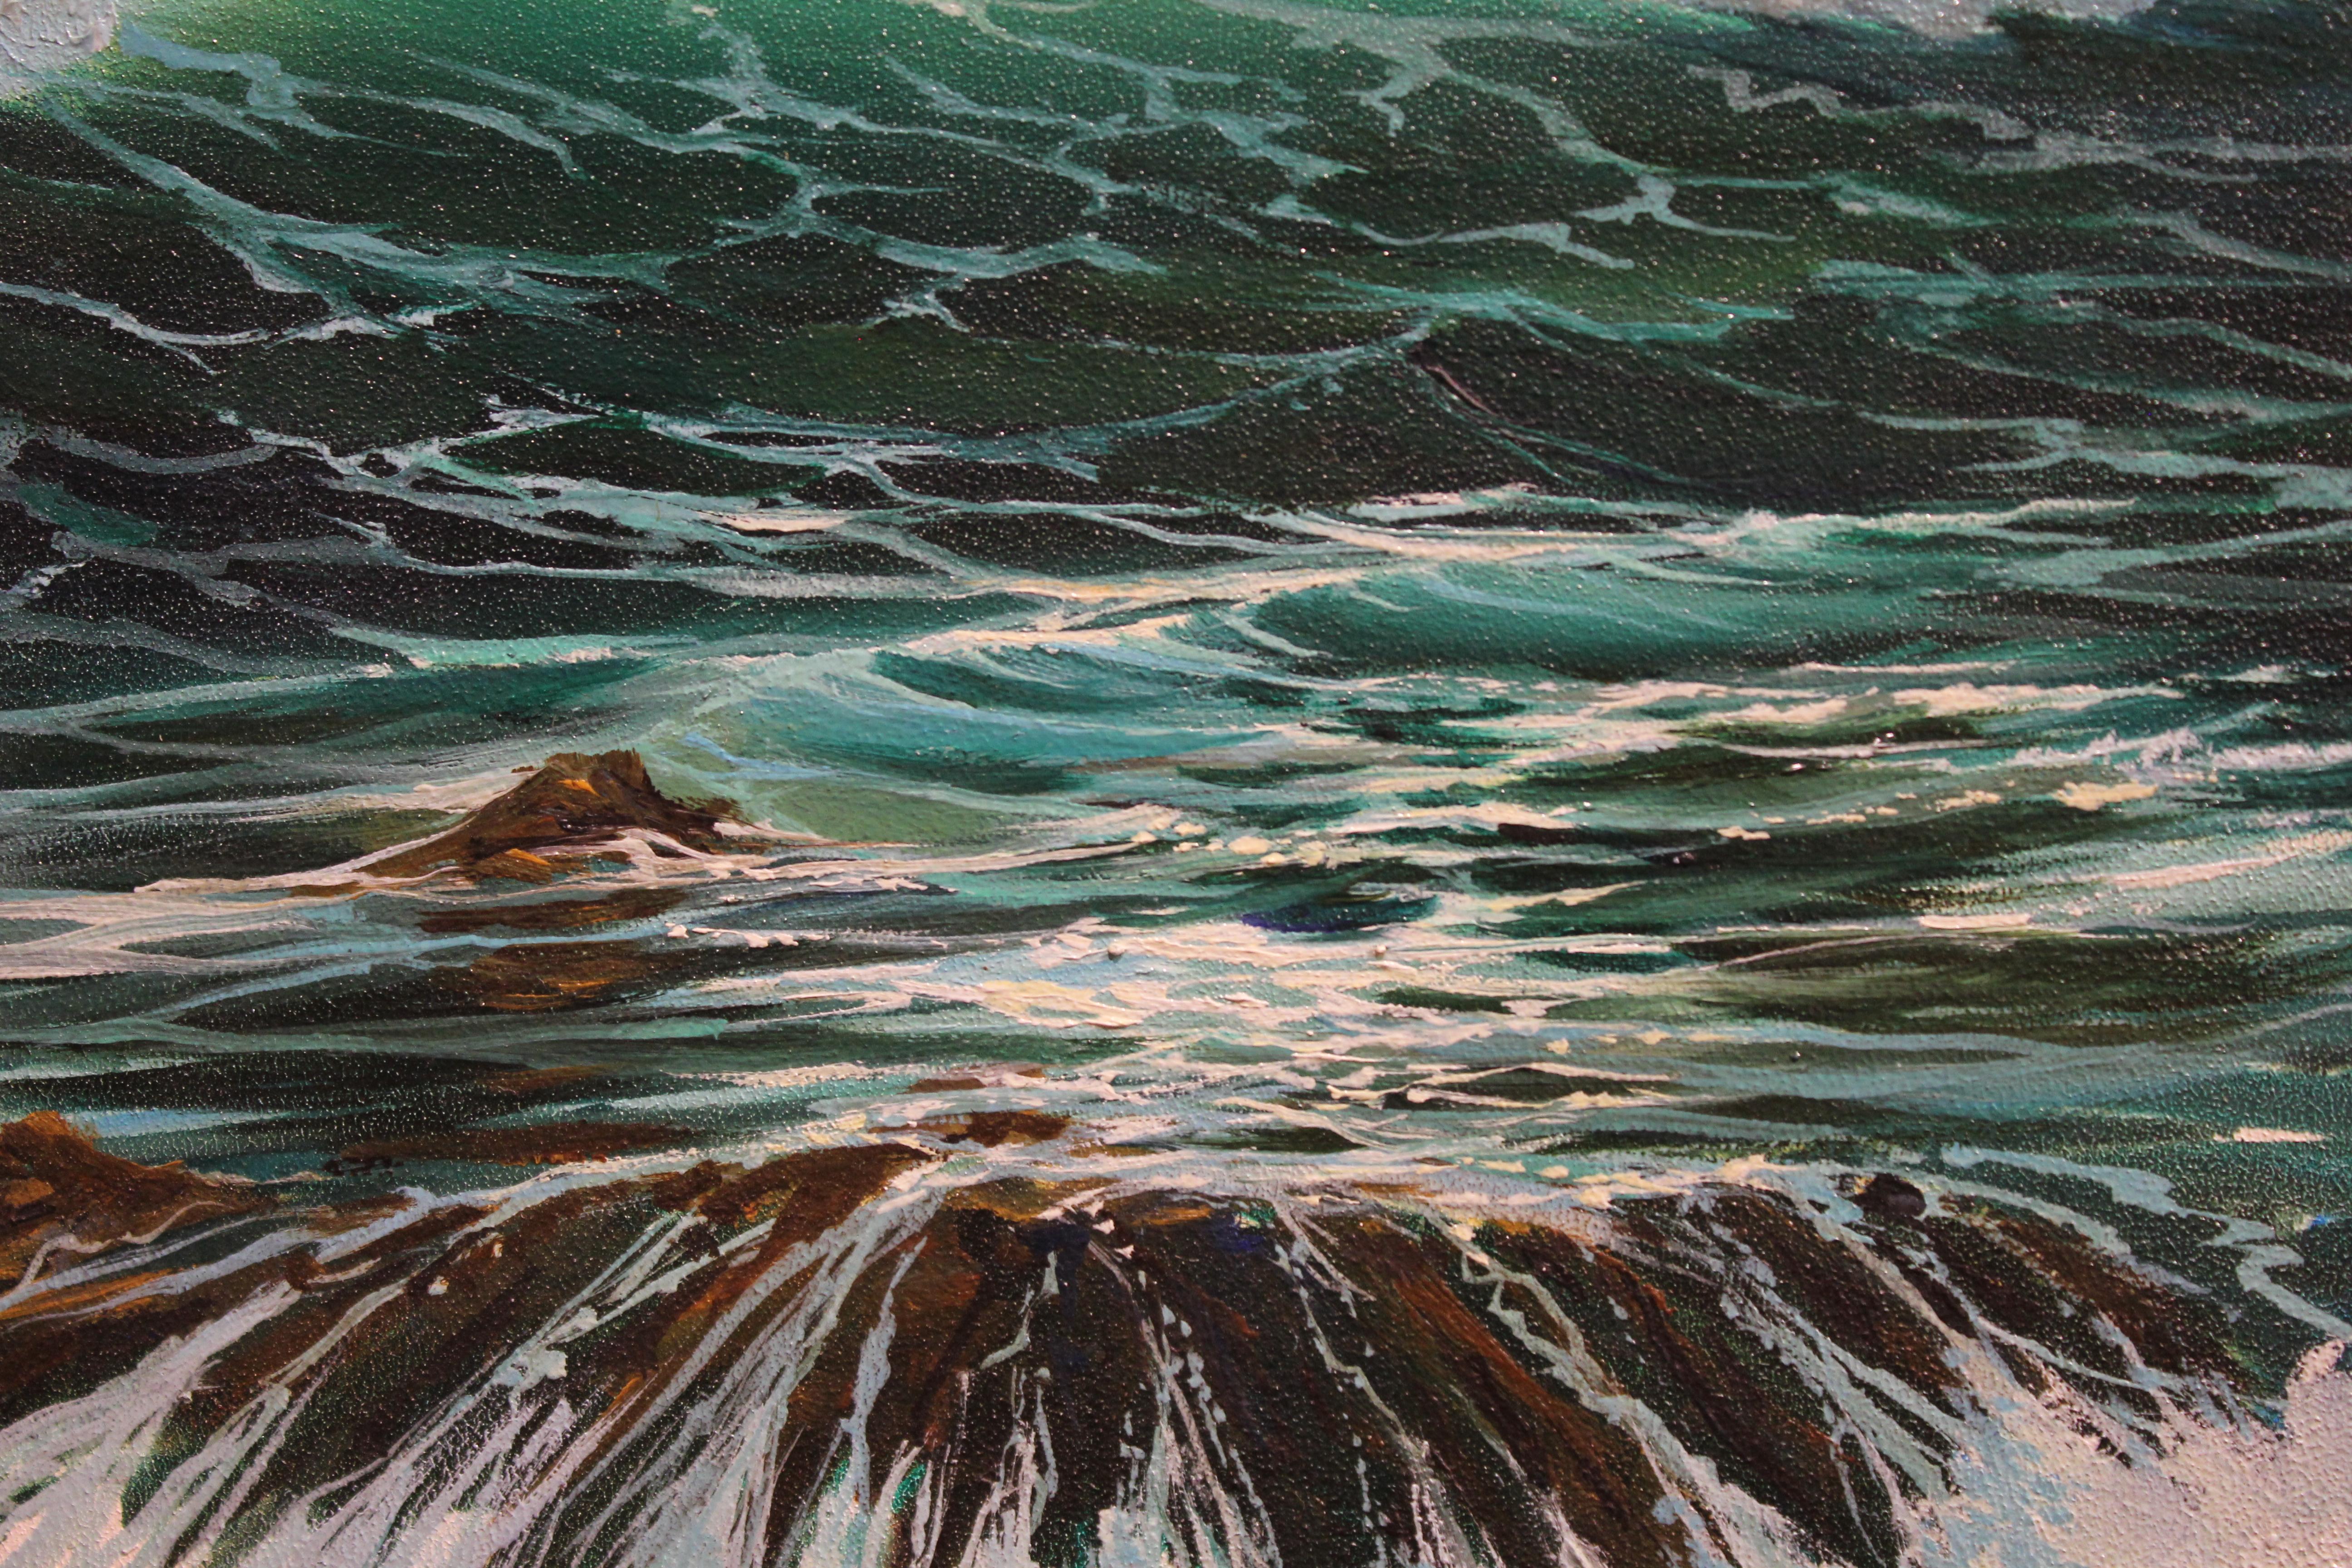 Stormy Seascape with Seagull Flying and Crashing Waves - Naturalistic Painting by Richard Weers